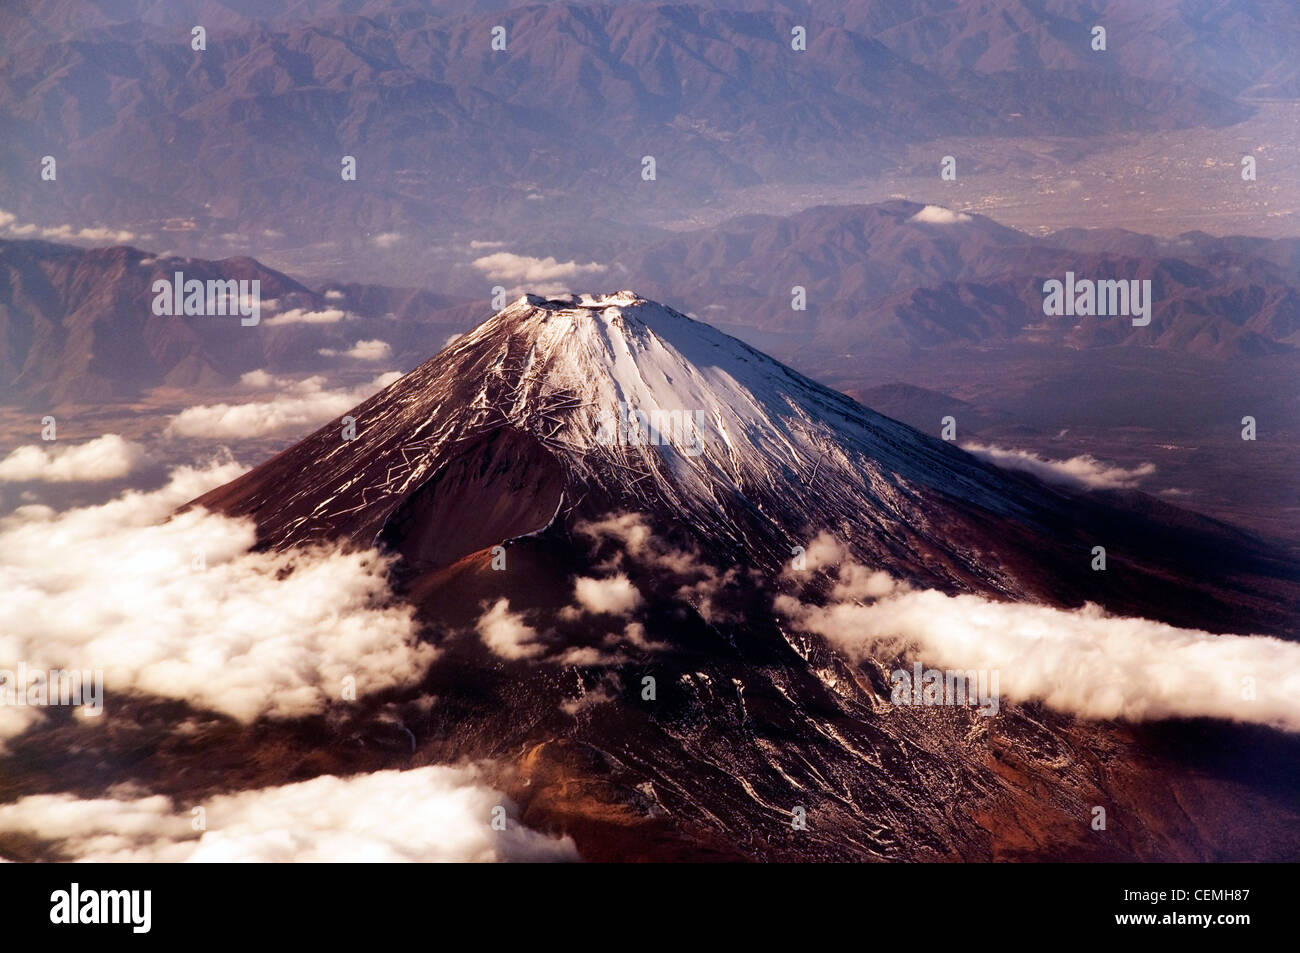 Mount Fuji, seen from above Stock Photo - Alamy